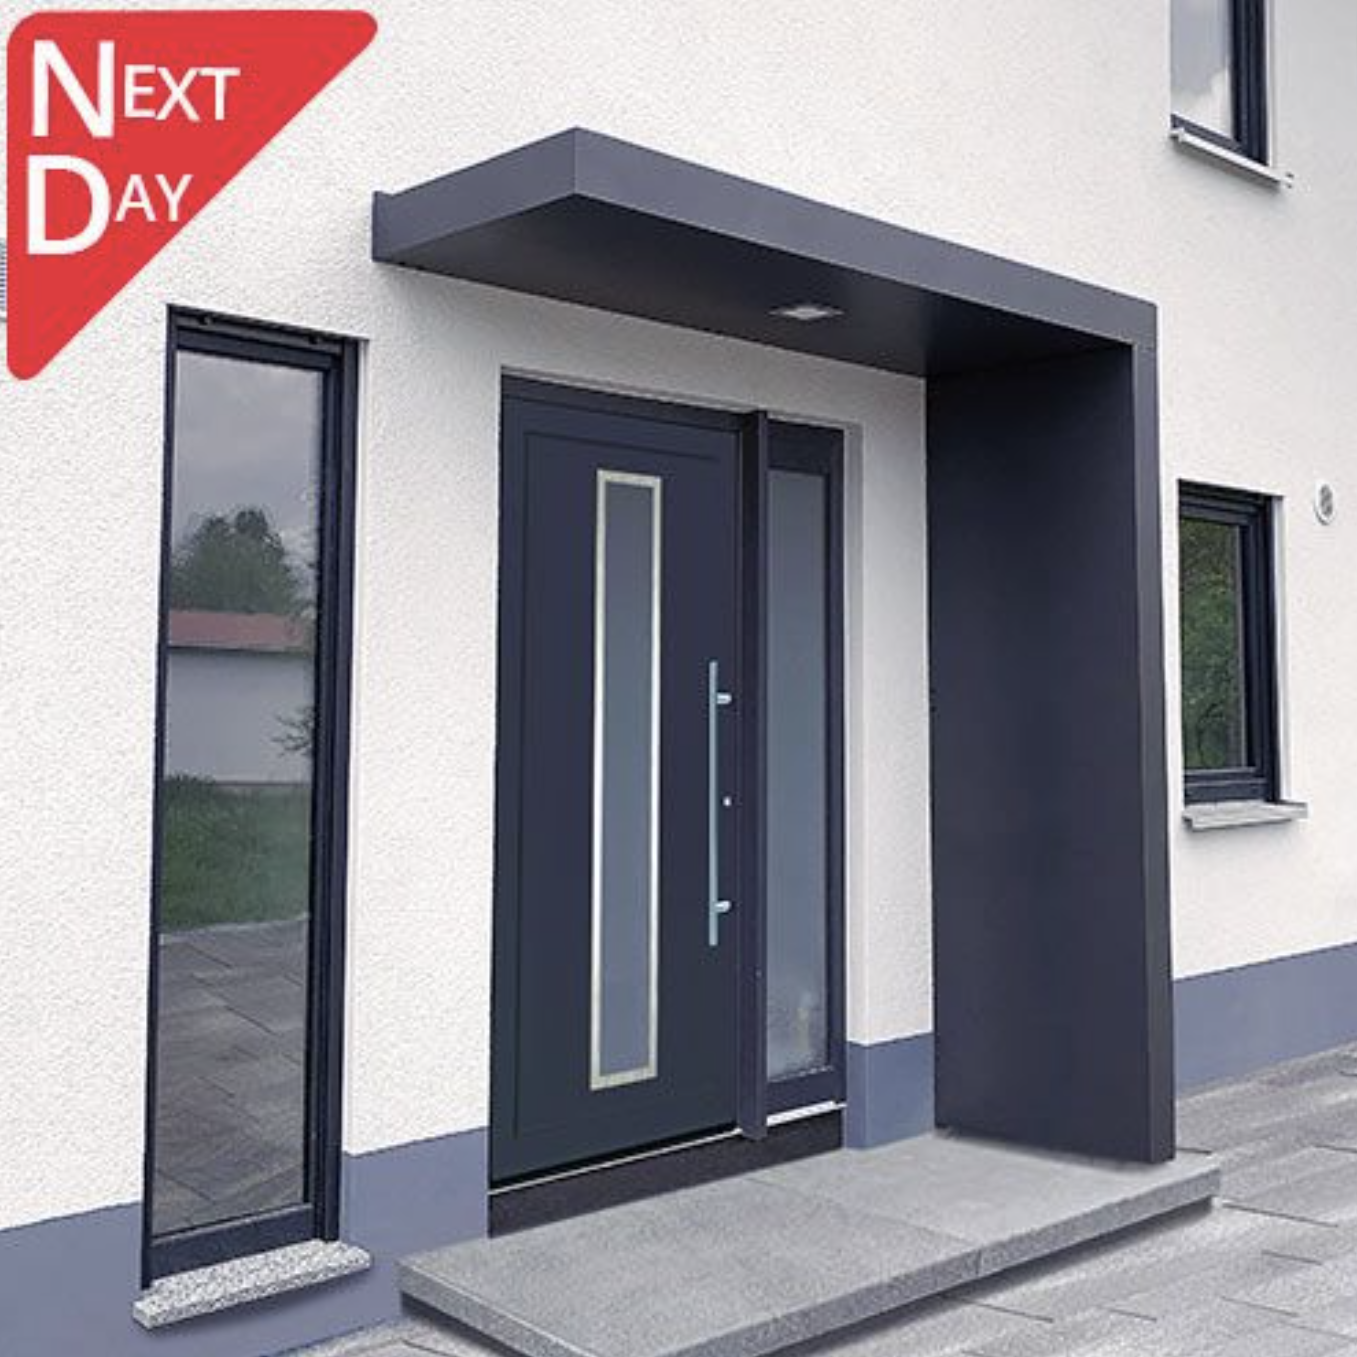 200x90cm Aluminium Canopy With Single LED Light Side Panel - Anthracite Grey (Left or Right)